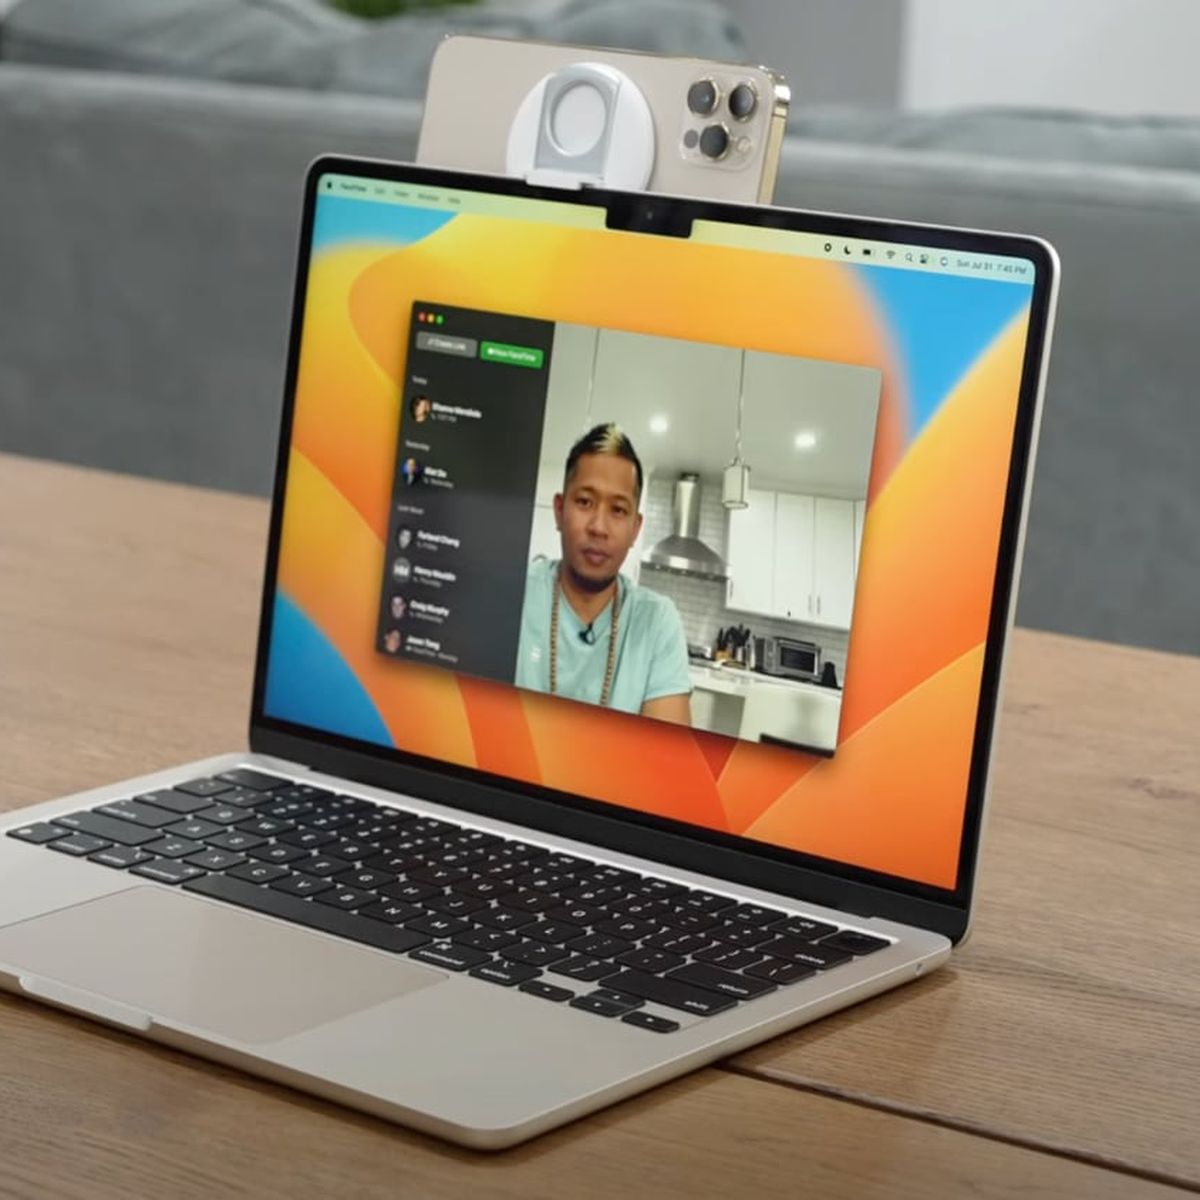 Apple's Continuity Camera lets you use your iPhone as a webcam